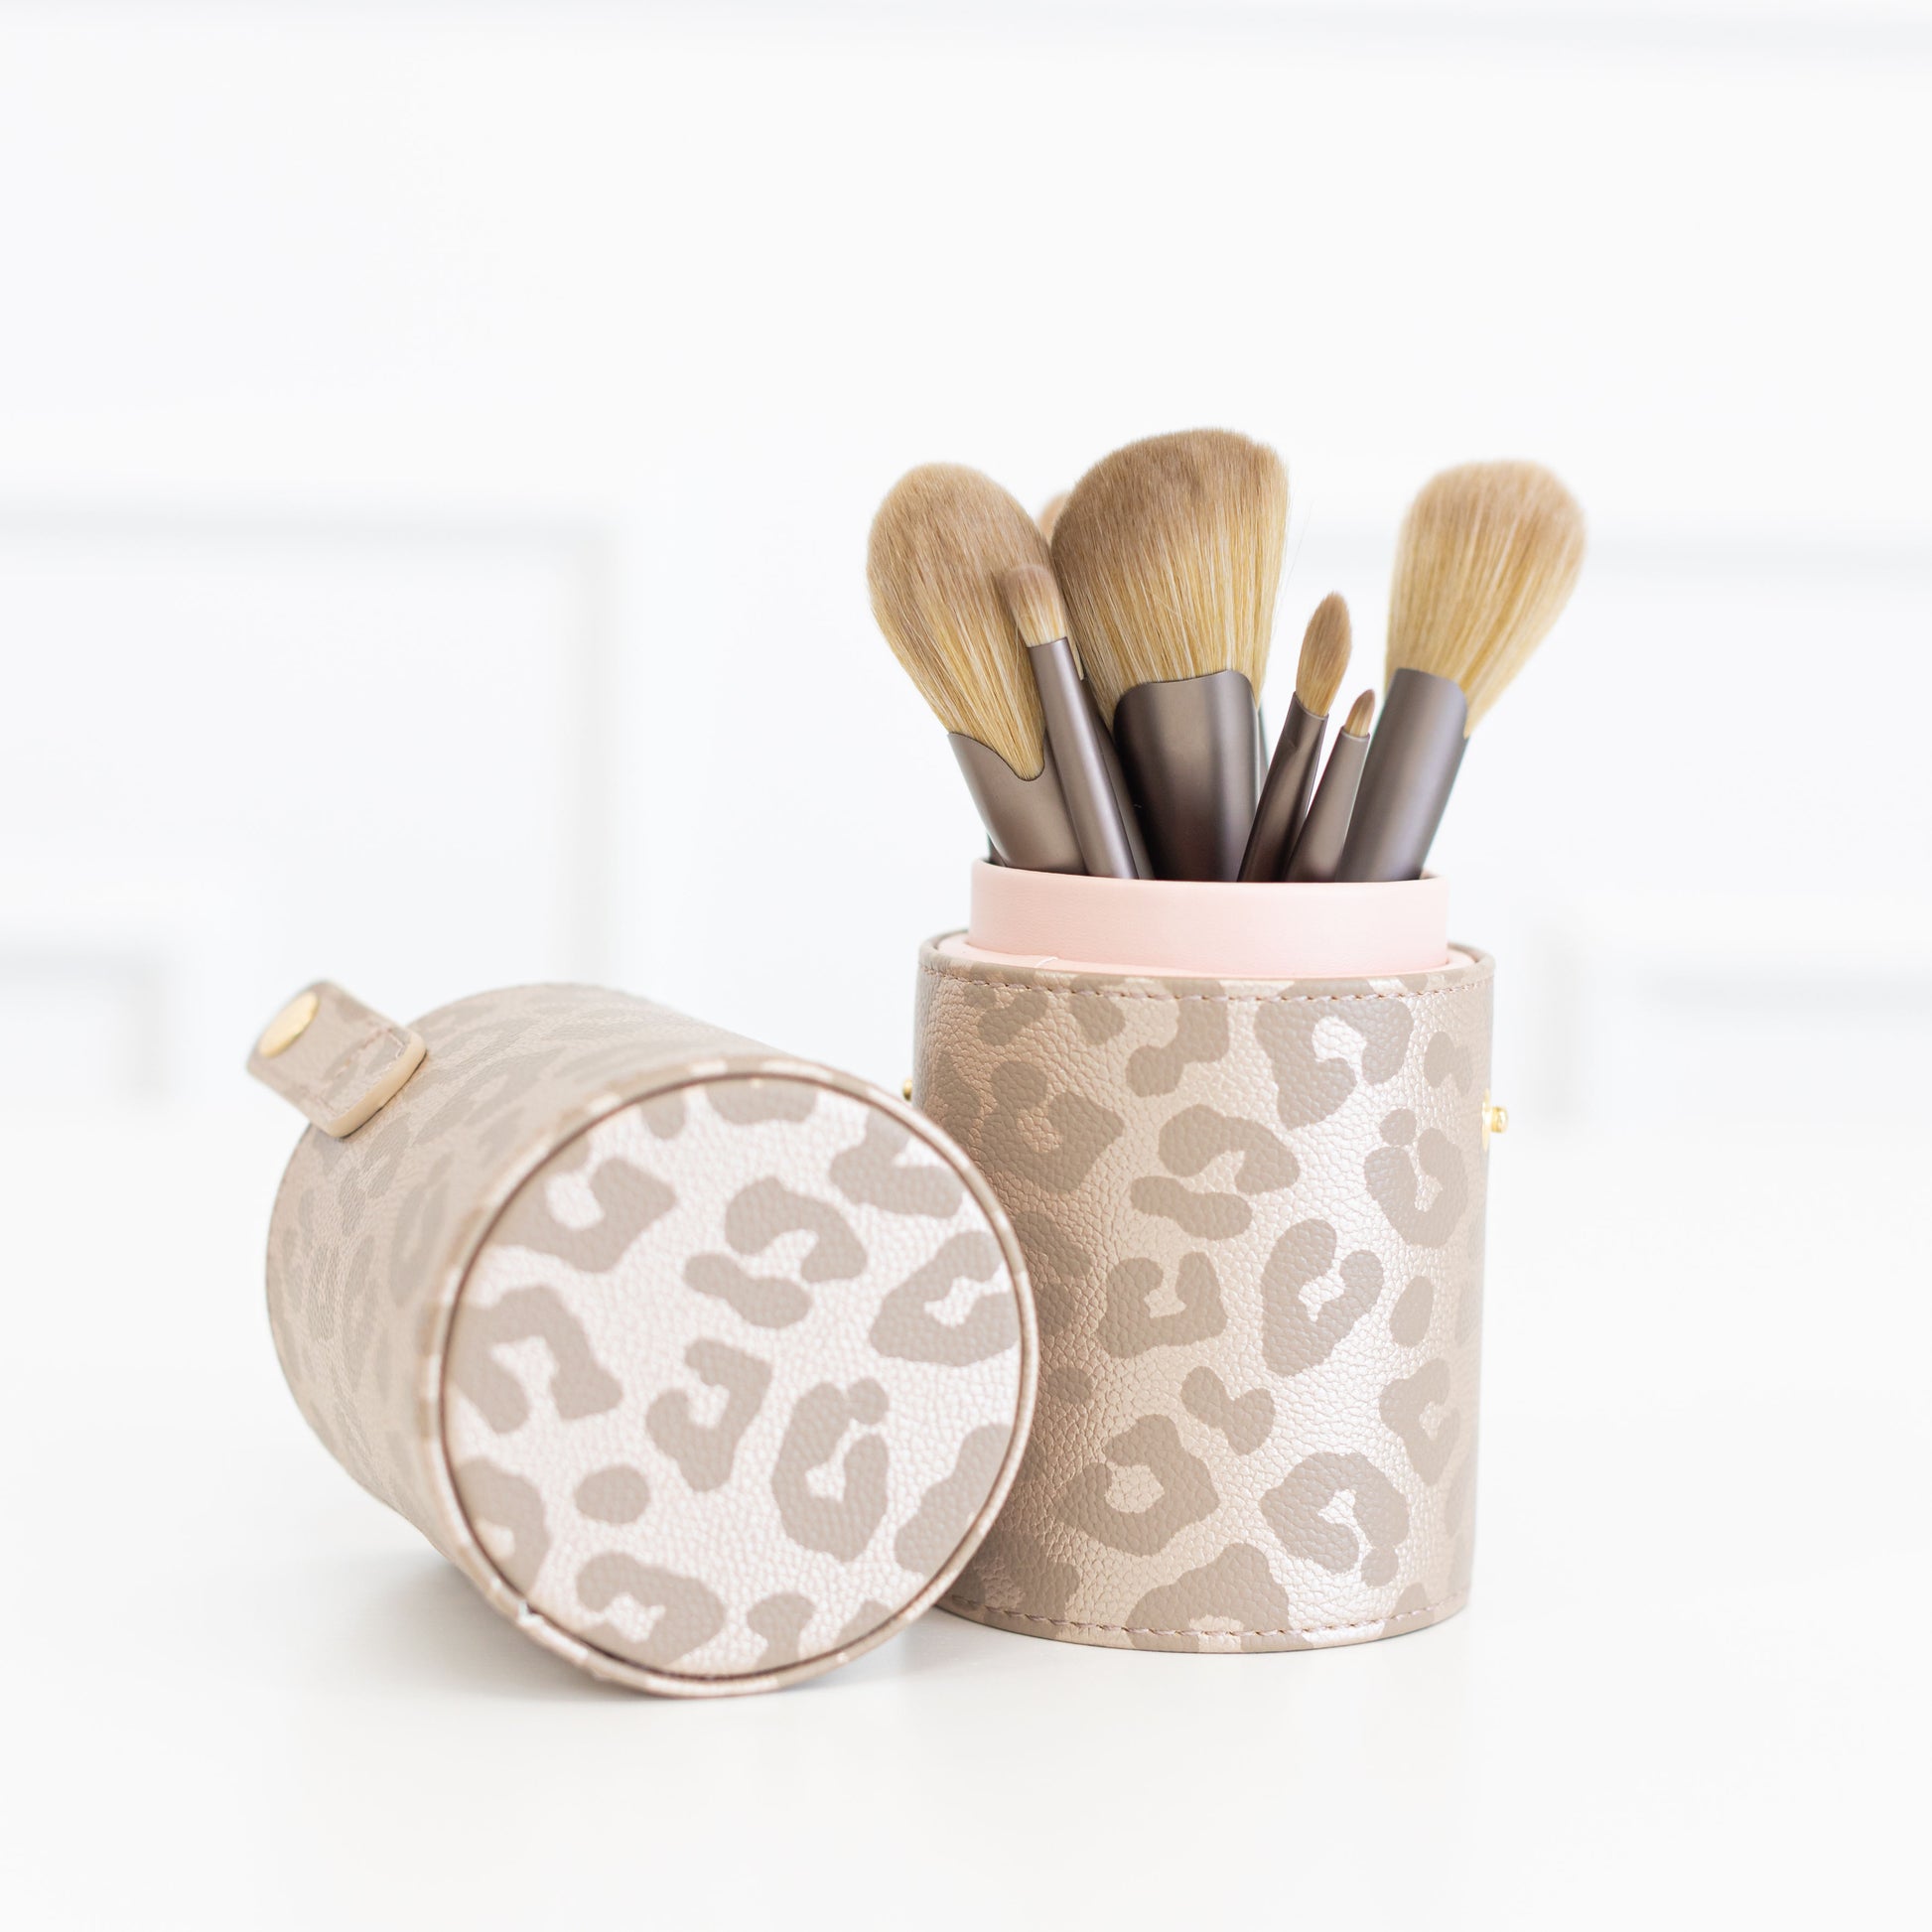 Makeup and Brush Holder - 3 Compartment Makeup Brush Holder - Makeup Brush  Organizer - 6.99 - organizer - LA Minerals